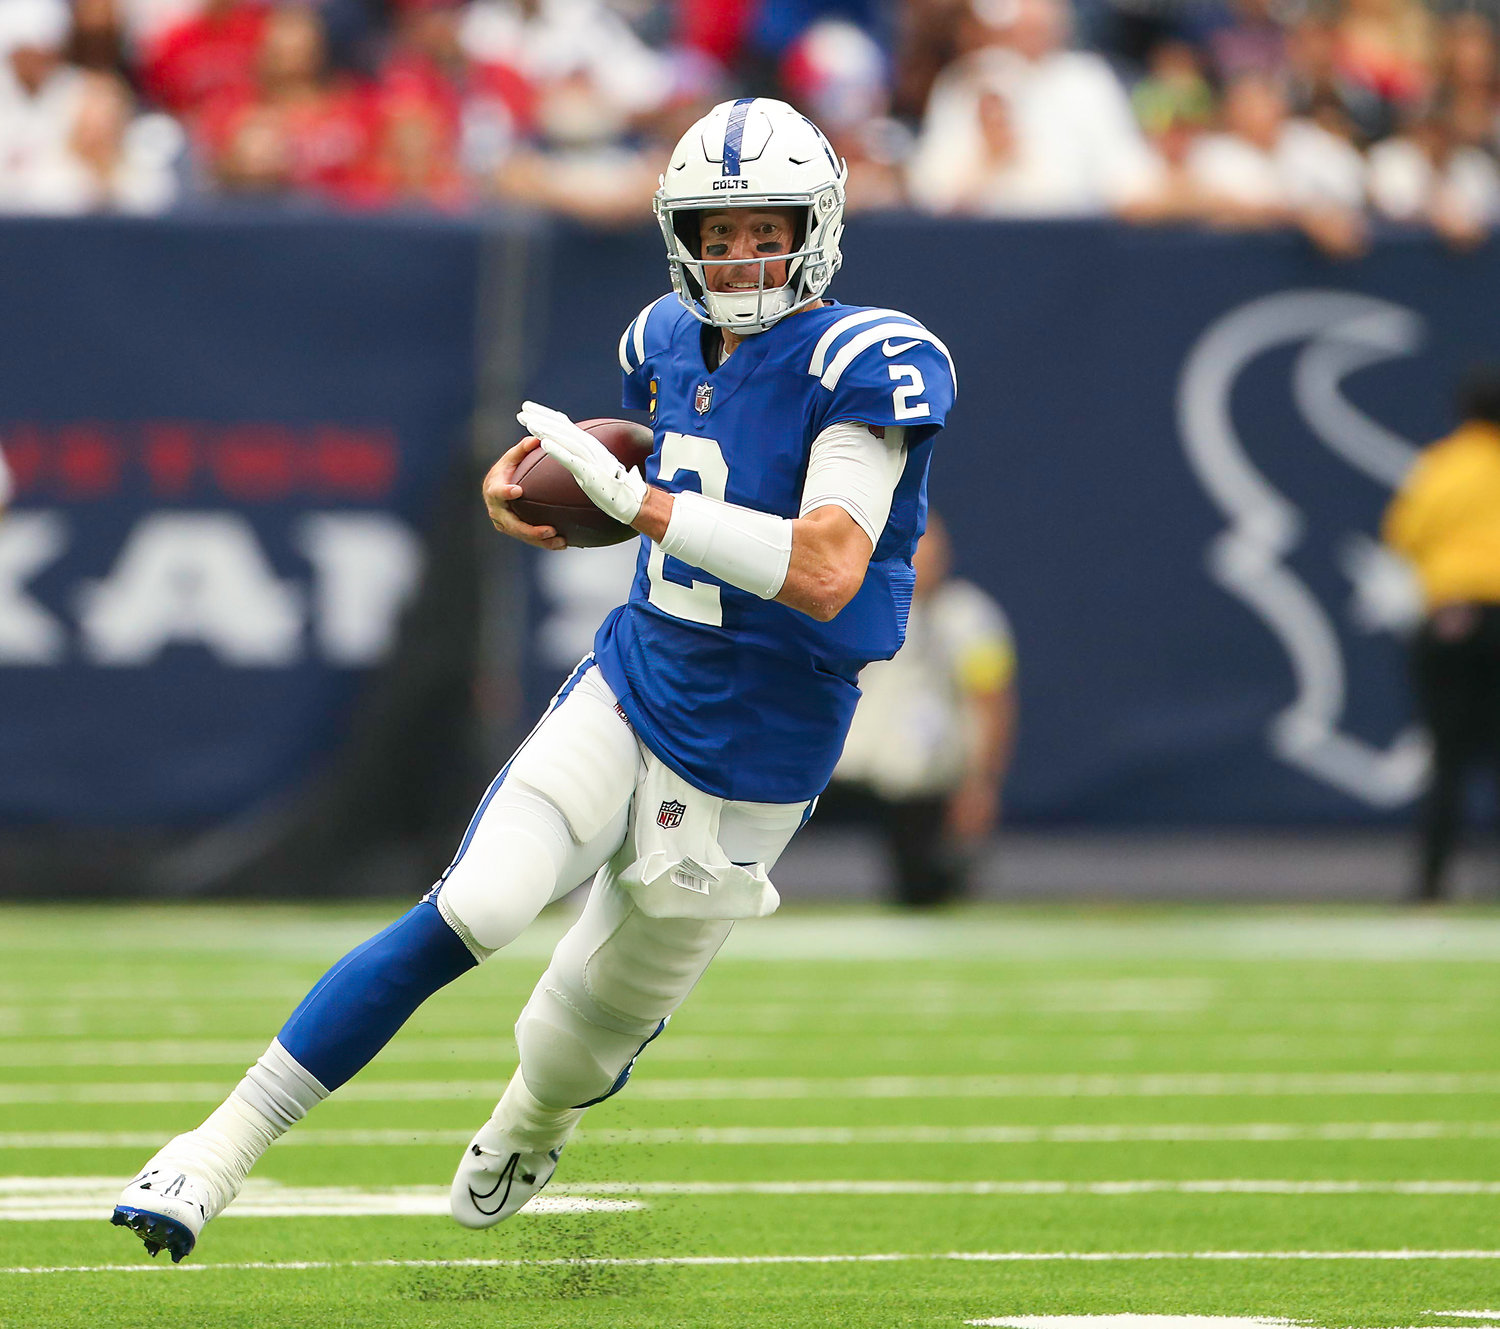 Indianapolis Colts quarterback Matt Ryan (2) runs for a first down during an NFL game between the Texans and the Colts on September 11, 2022 in Houston. The game ended in a 20-20 tie after a scoreless overtime period.